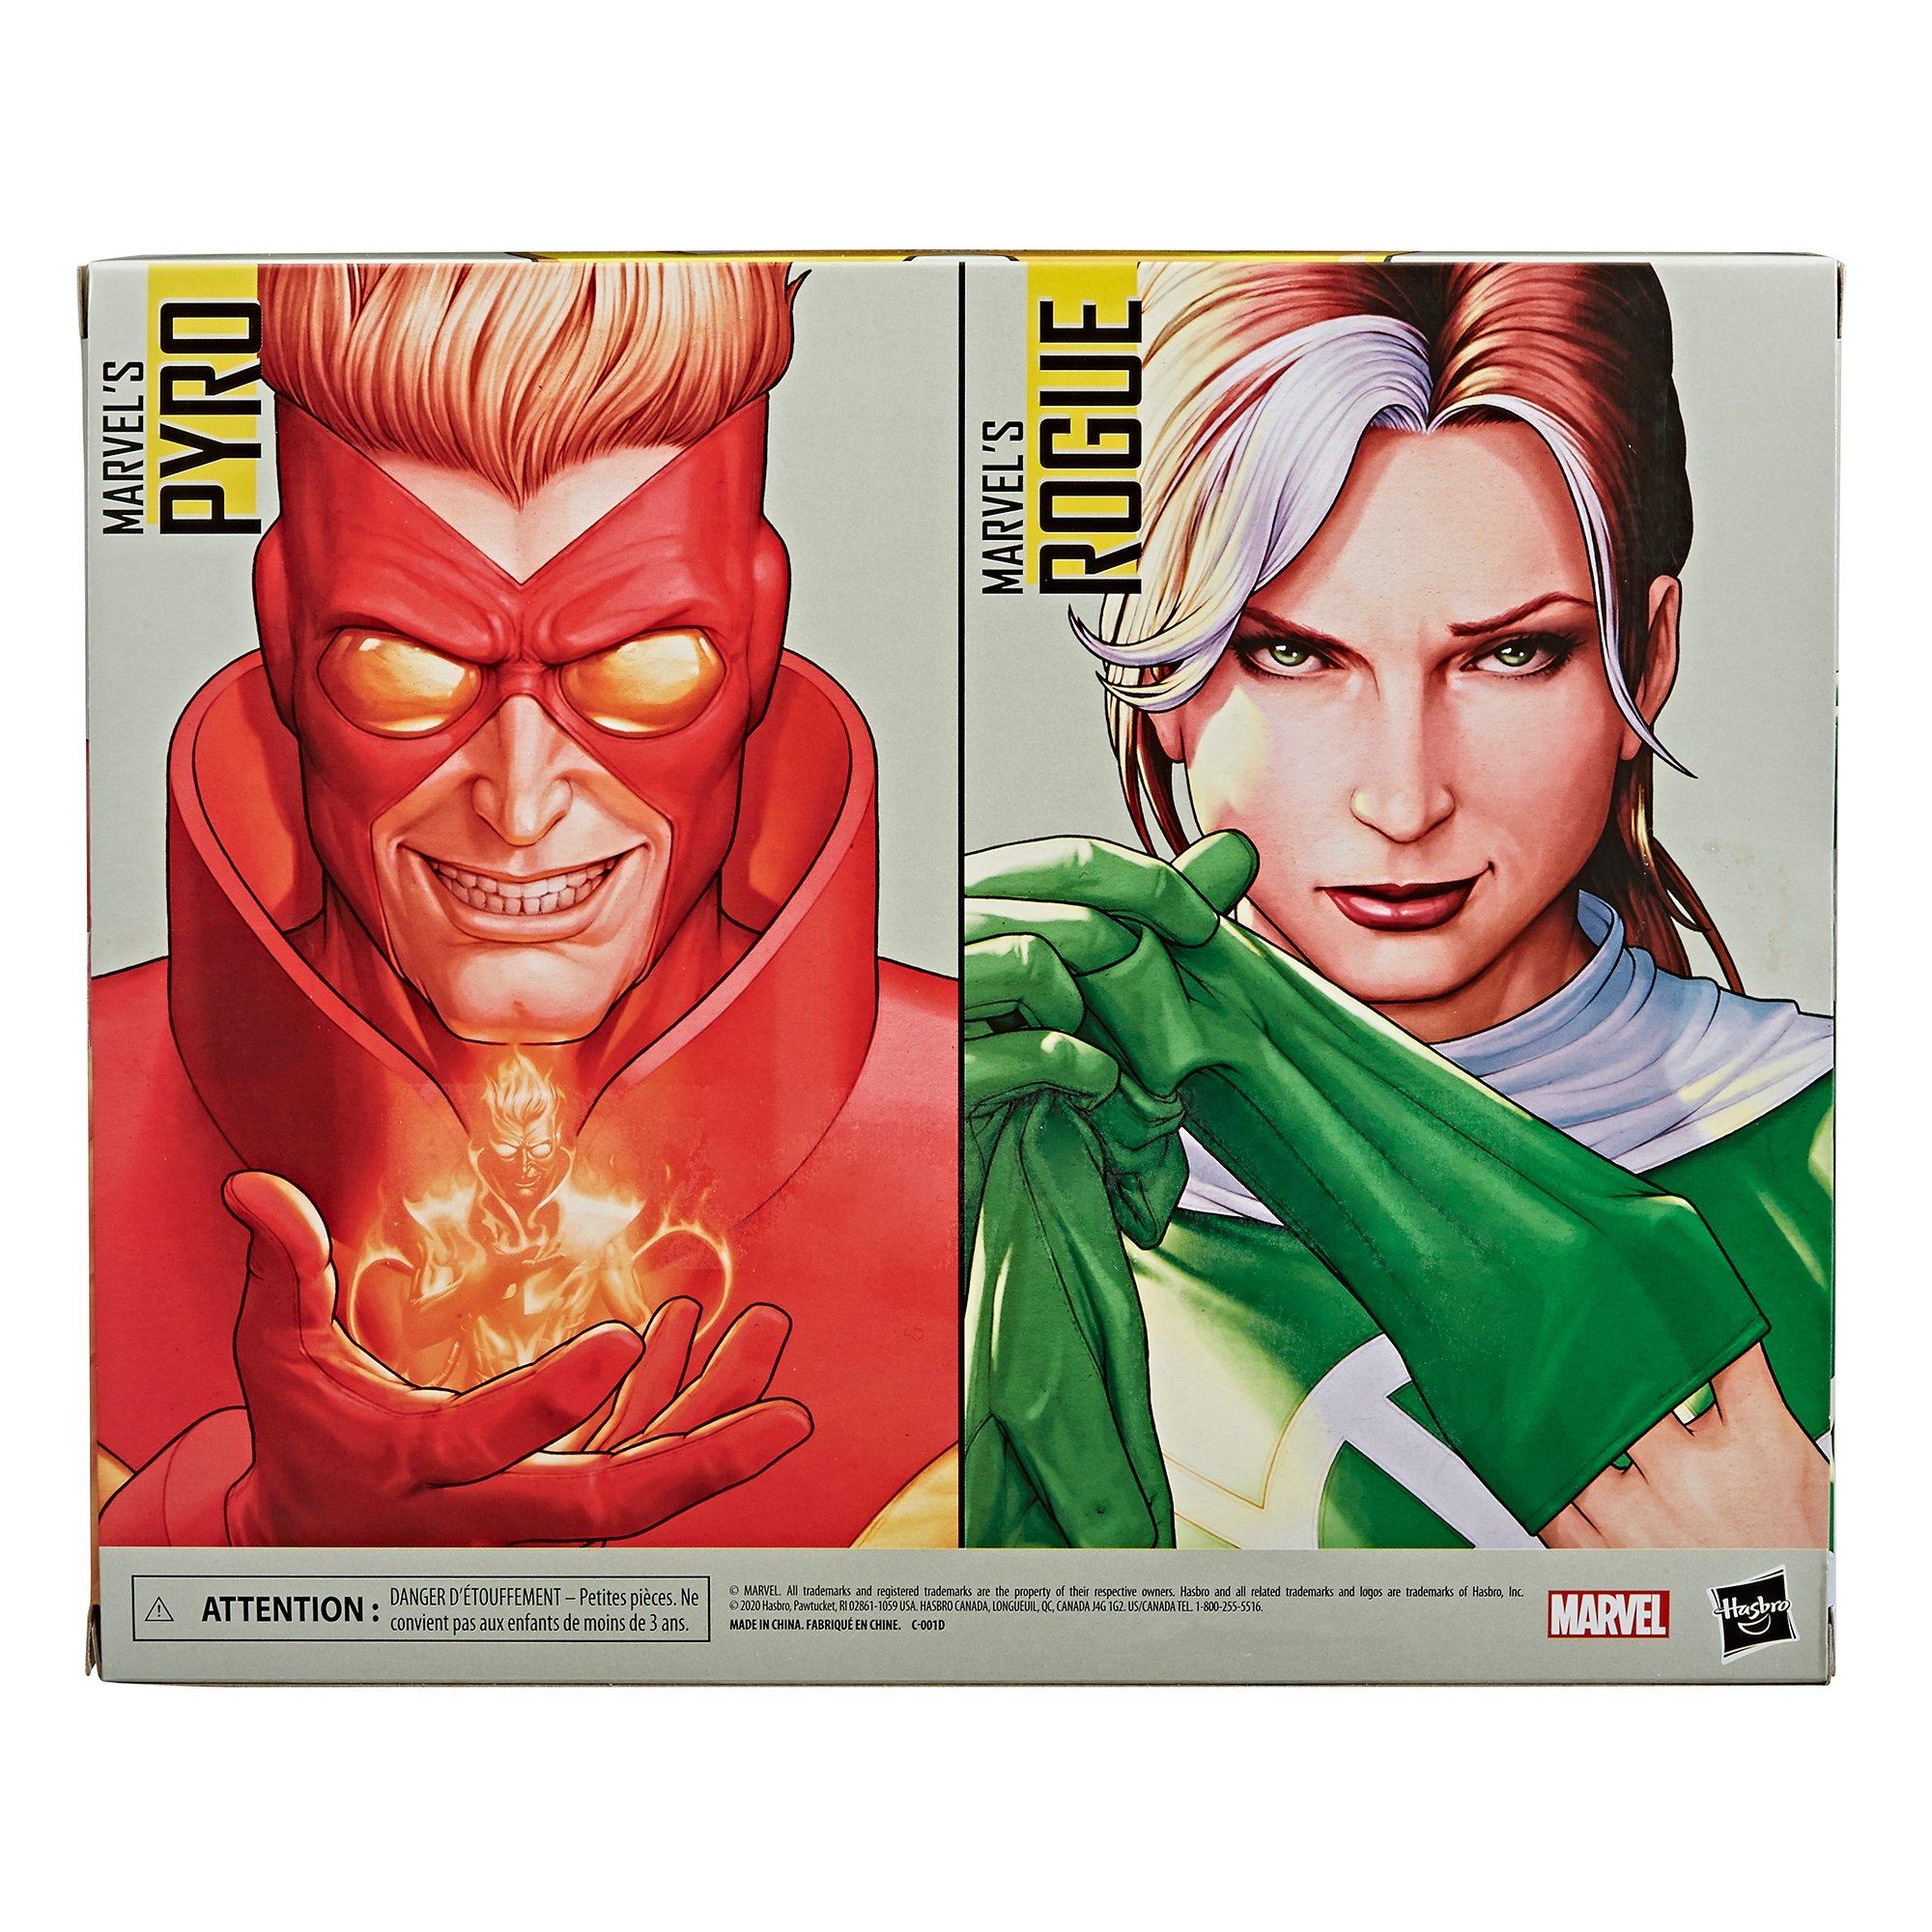 E9293 Hasbro Marvel Legends Series Marvel’s Rogue and Pyro 6" Action Figure for sale online 